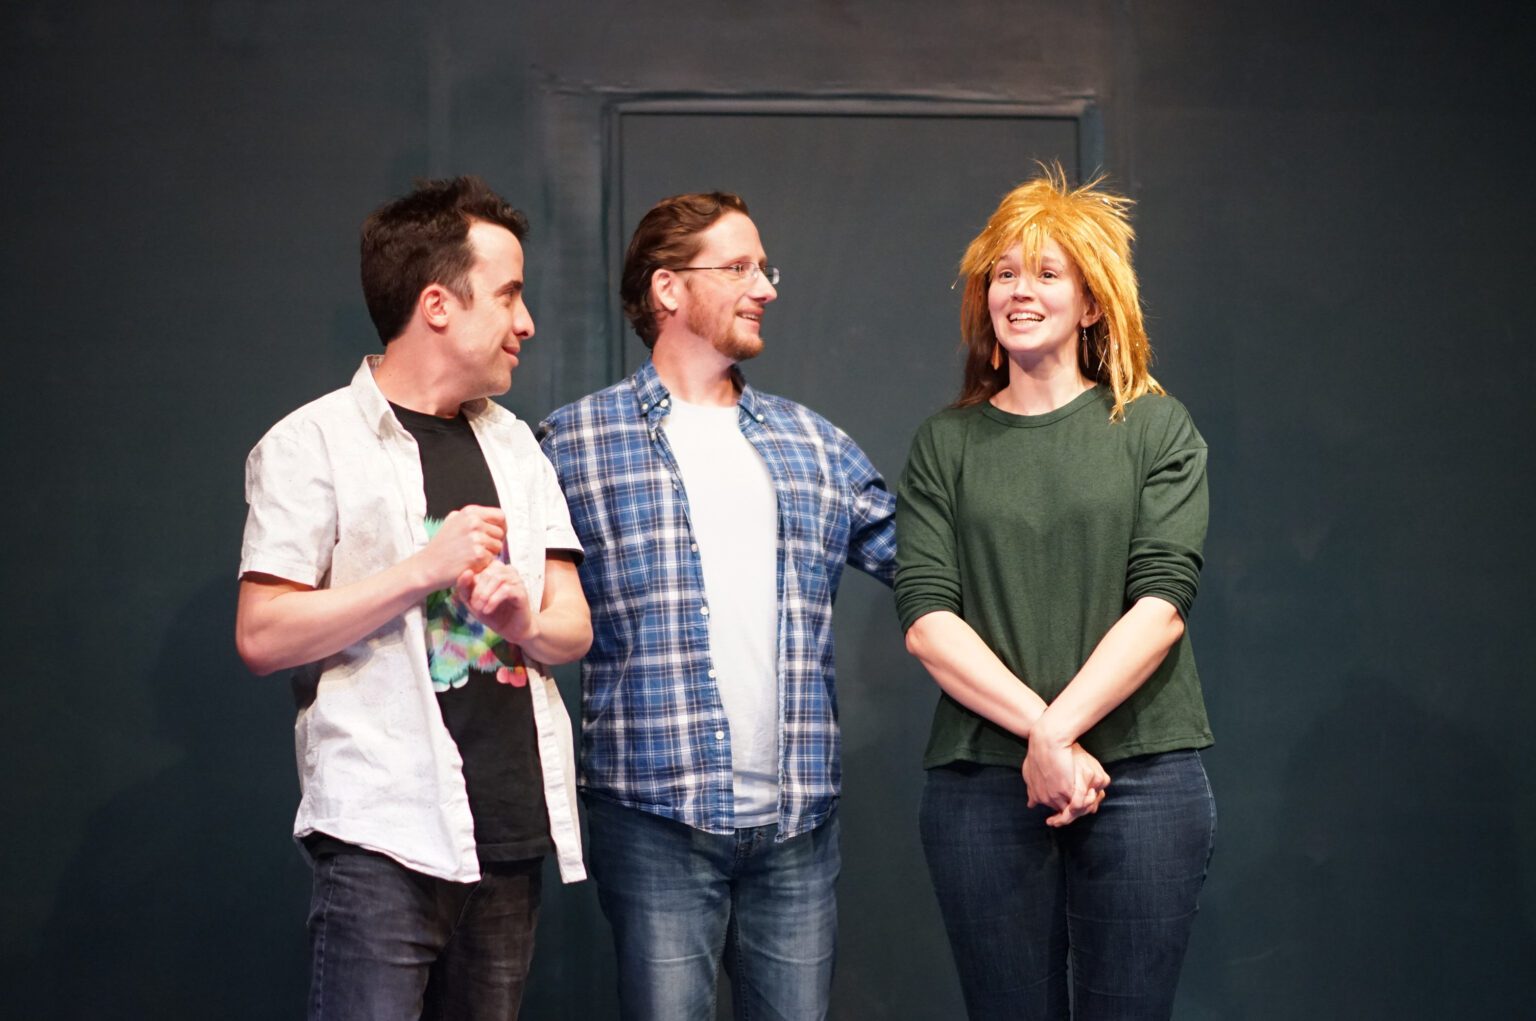 Audiences can help decide what happens next at The Upfront Theatre's "Bottled Lightning" shows every Friday and Saturday night through July at the Sylvia Center. Taking inspiration and suggestions from attendees